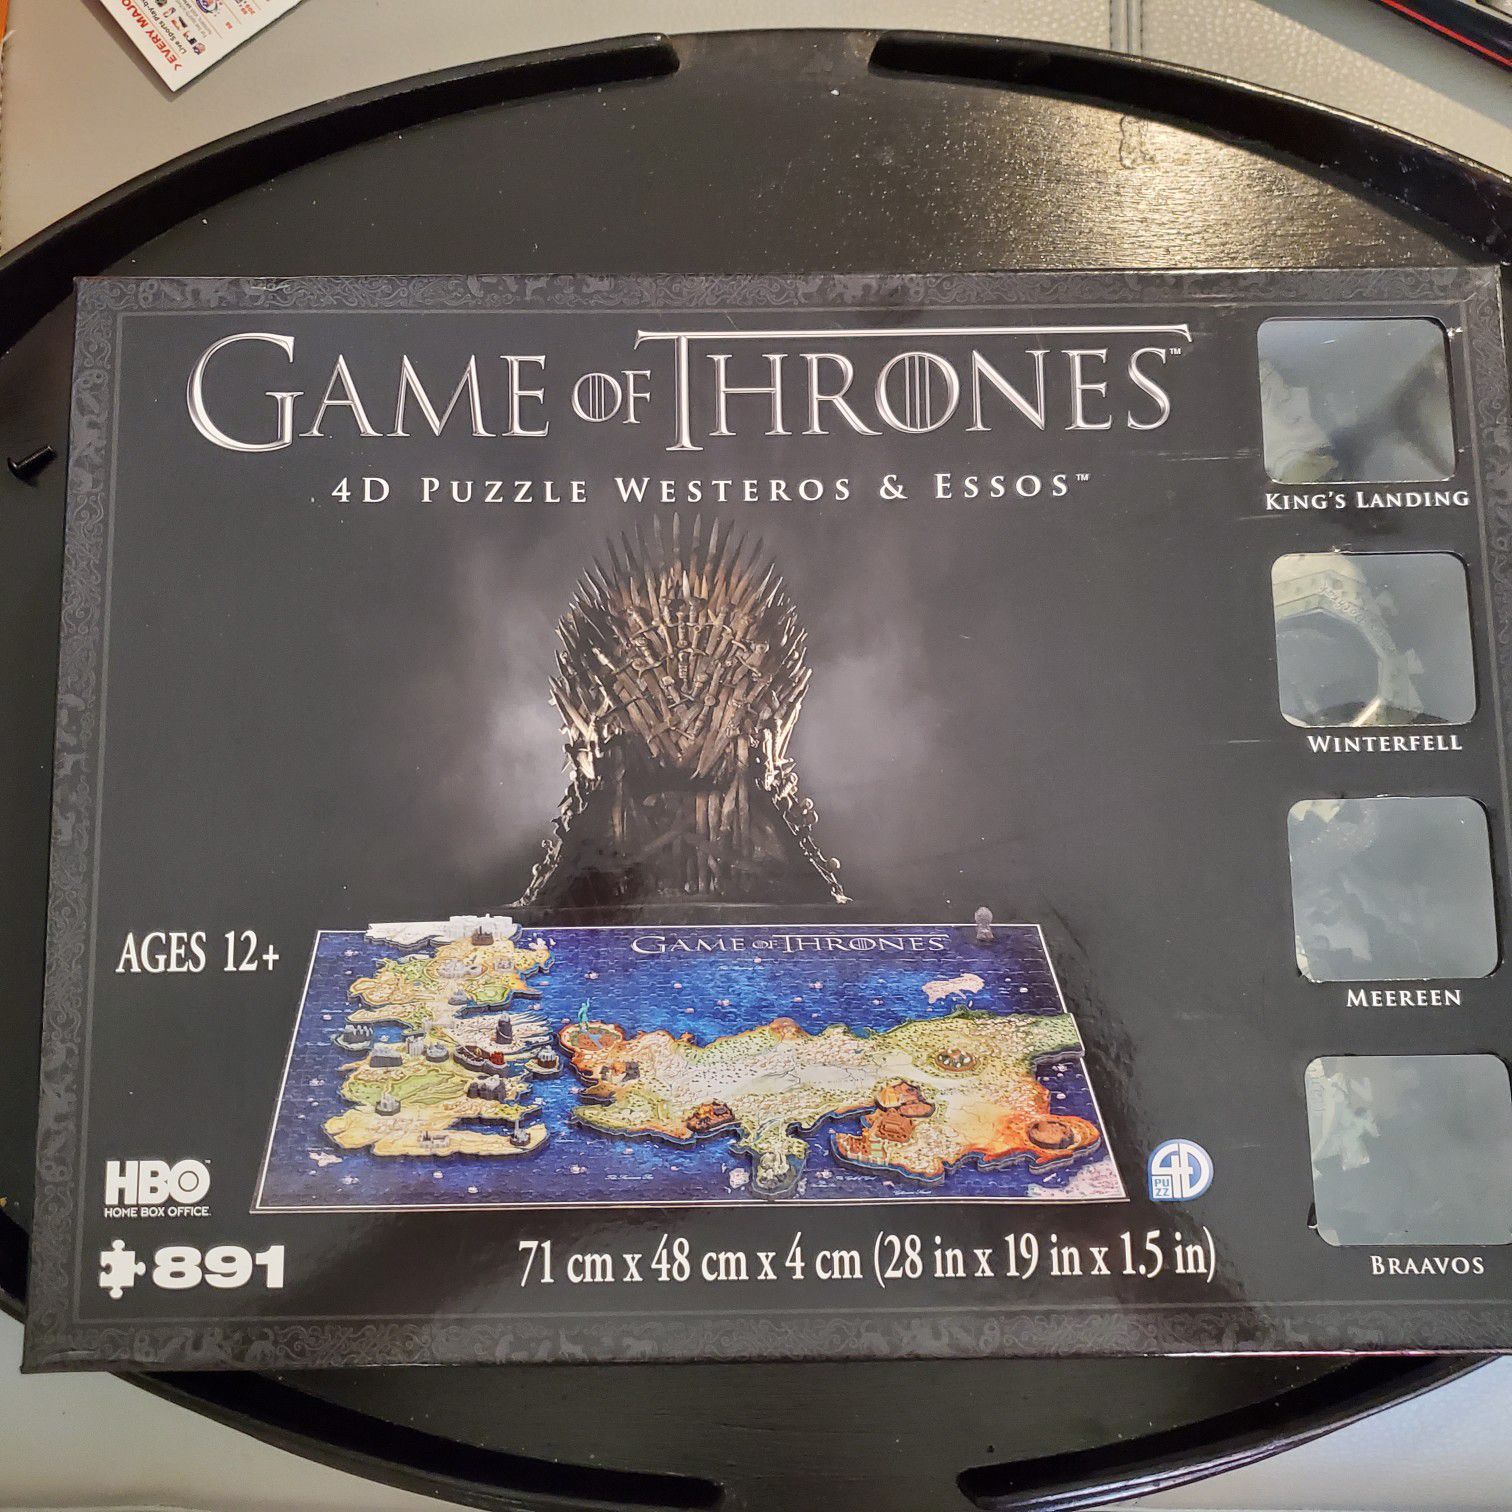 HBO Game of Thrones Puzzle (891 pieces) $10